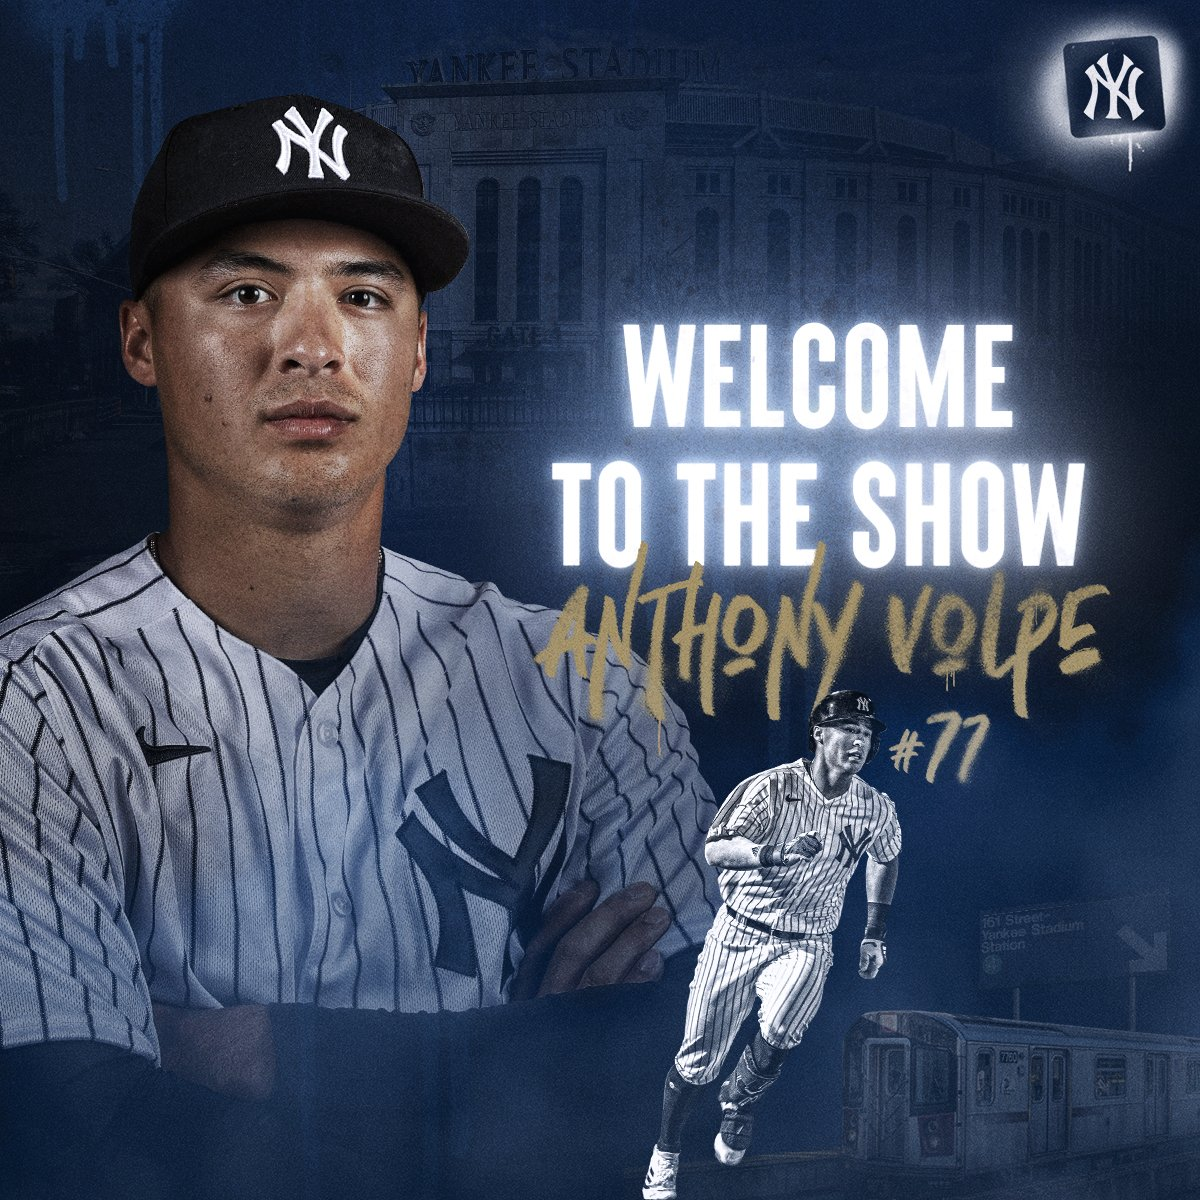 Anthony Volpe welcomed to the New York Yankees – The Charles Street Times